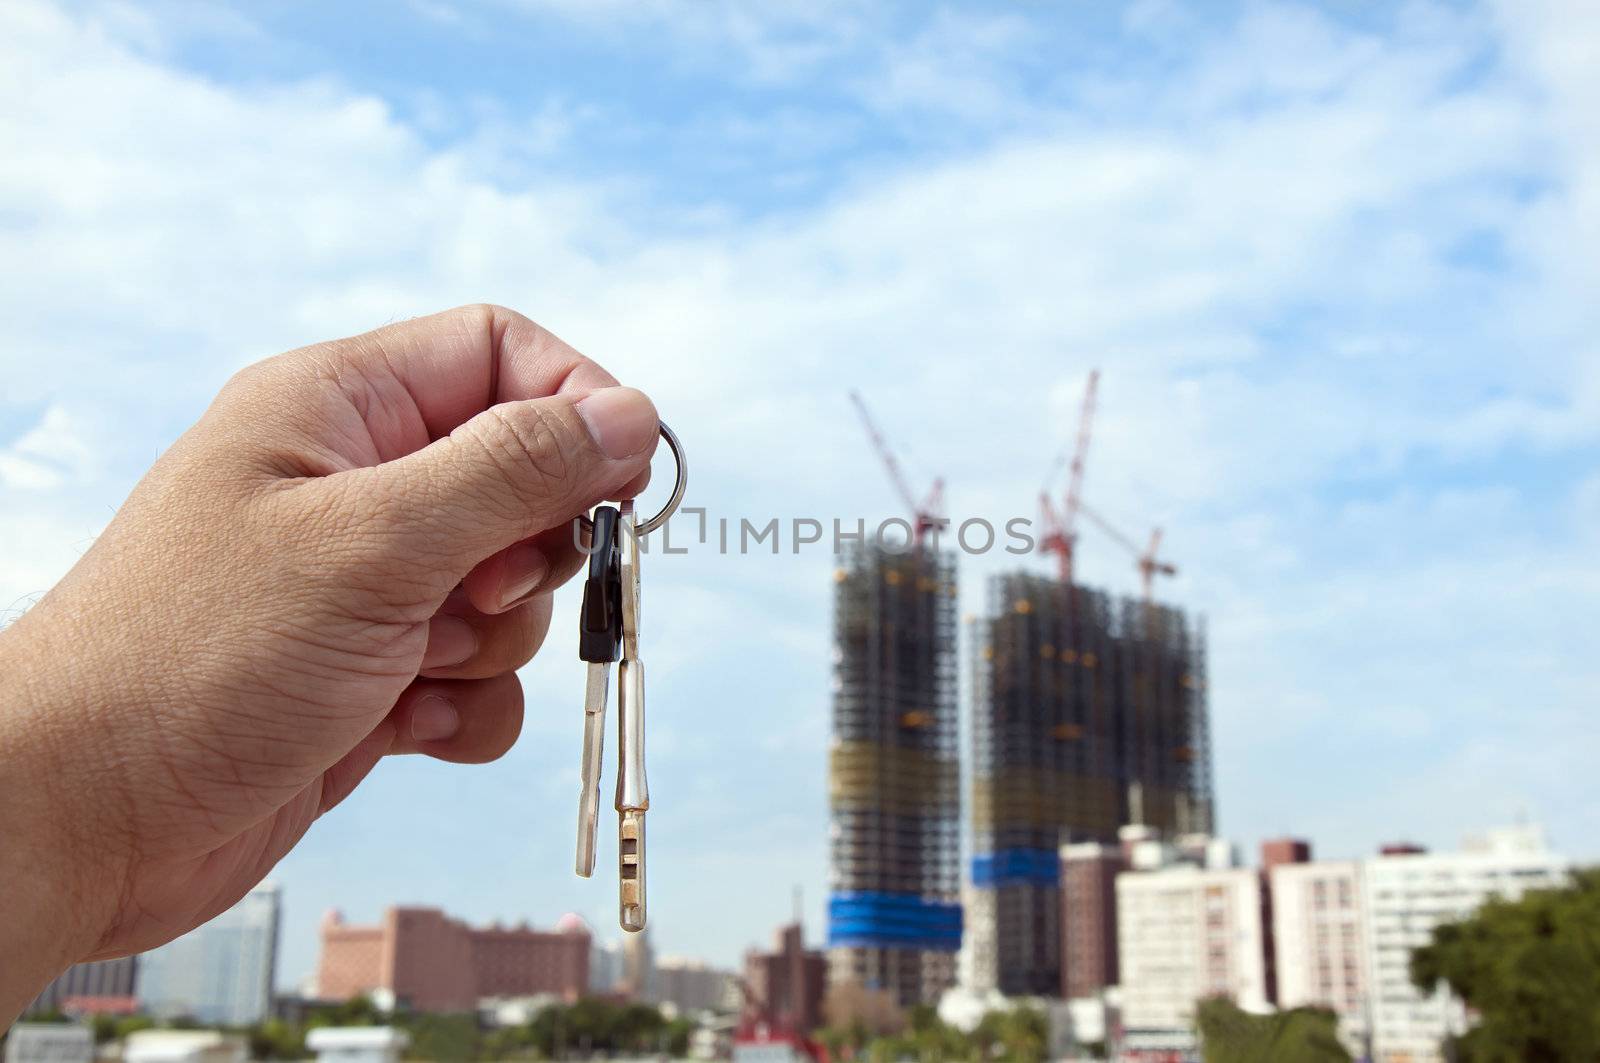 Took the key and construction of the building in the blurred background